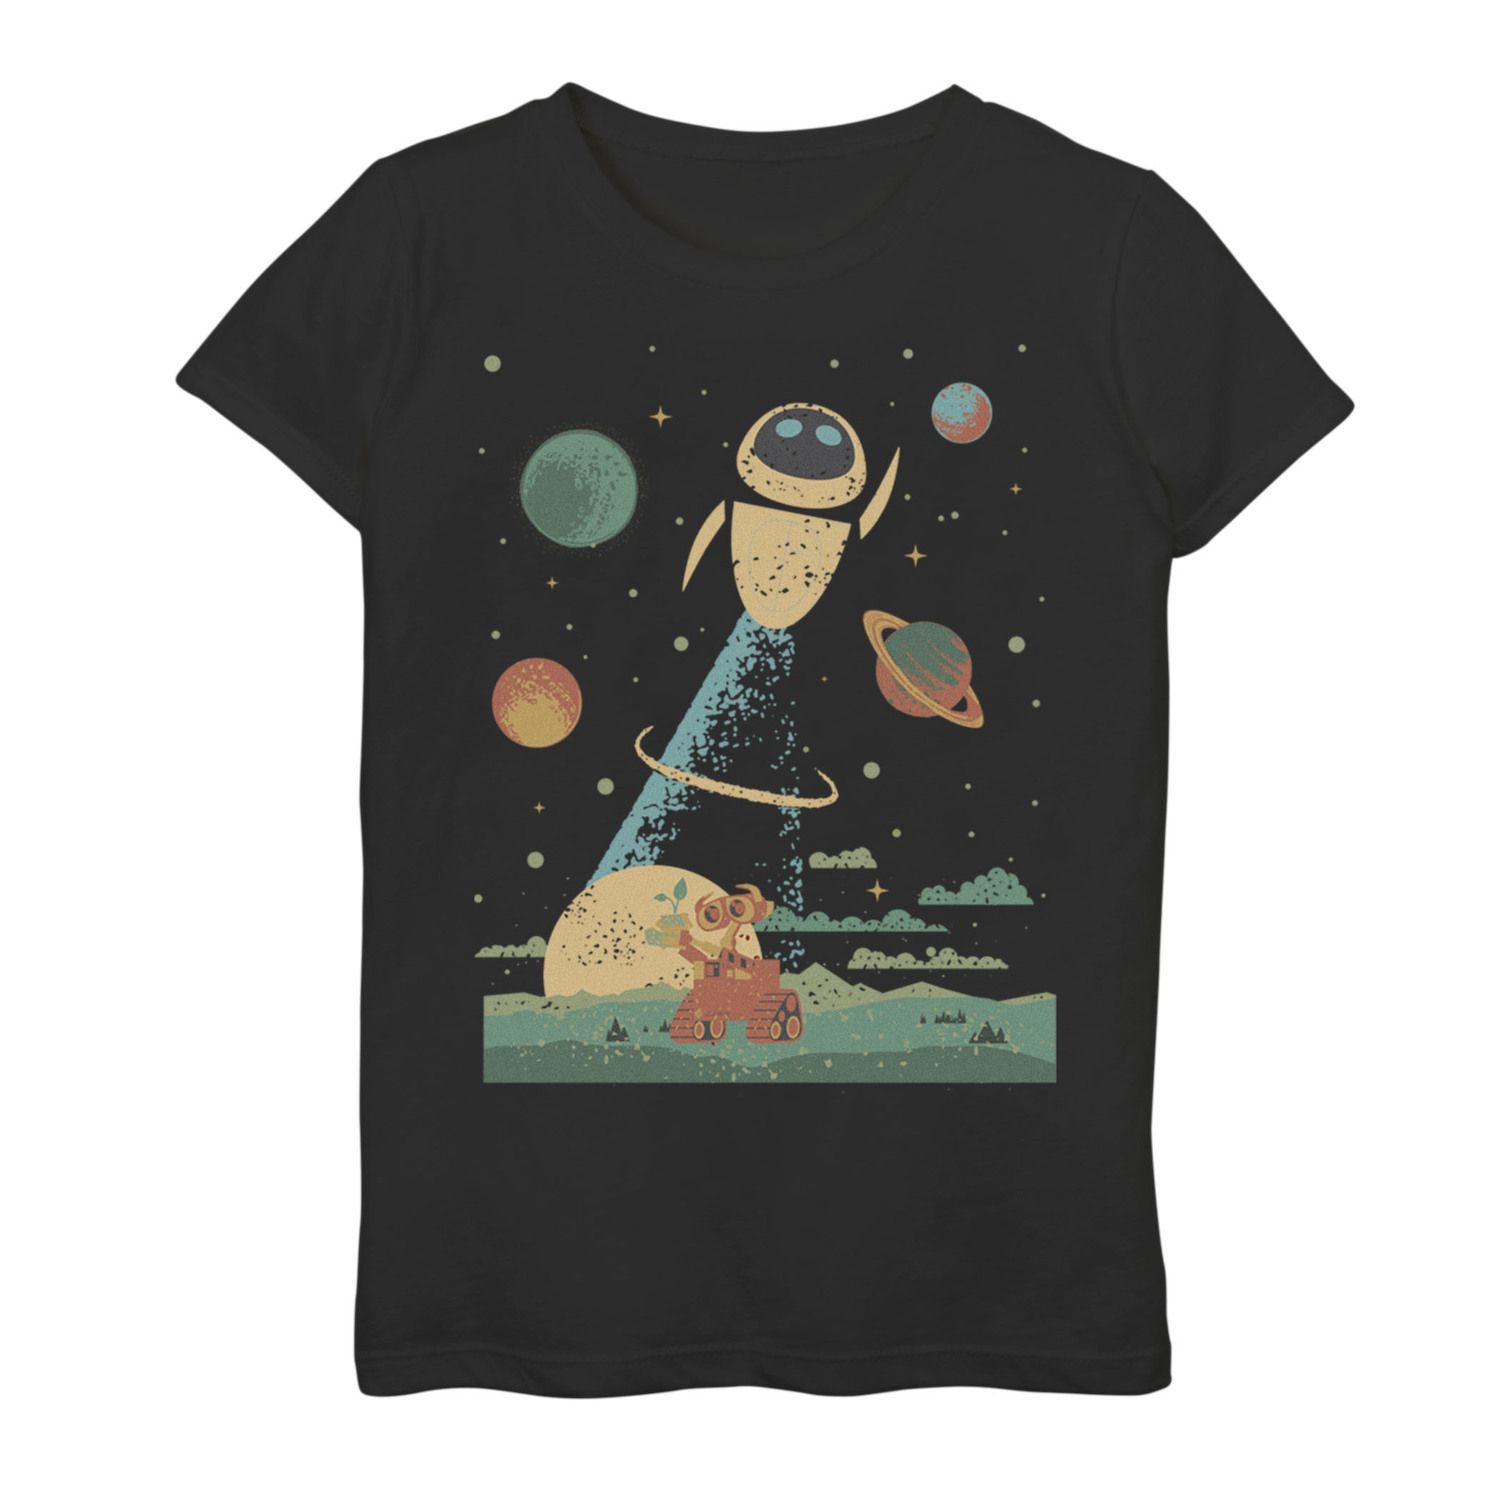 Image for Disney / Pixar 's Wall E Girls 7-16 Eve Vintage Planet Flight Graphic Tee at Kohl's.